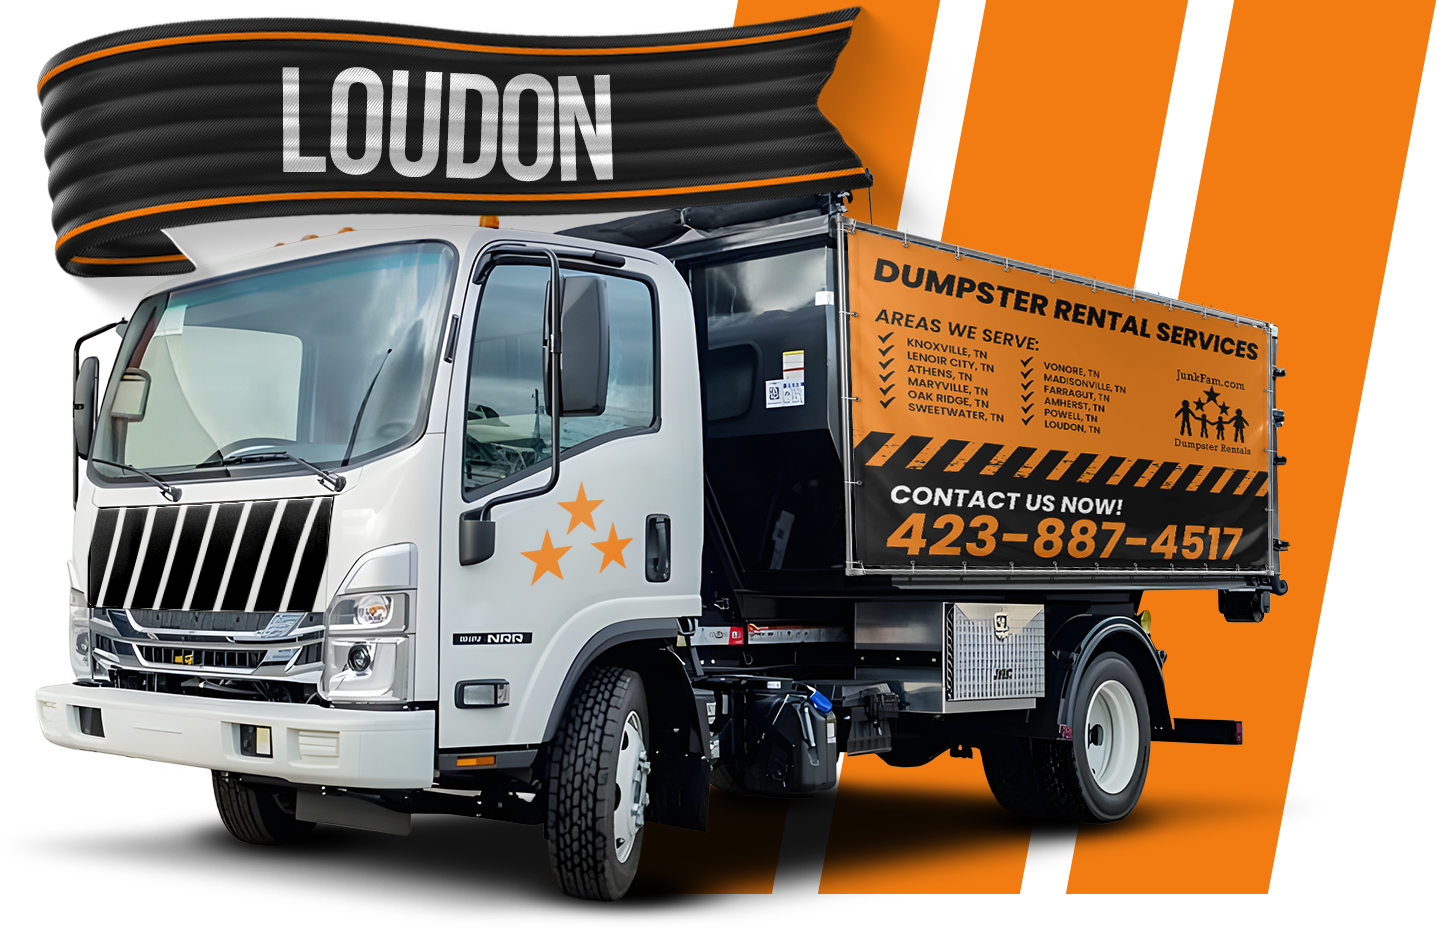 A dump truck with the word Loudon on the side is parked on a white background.